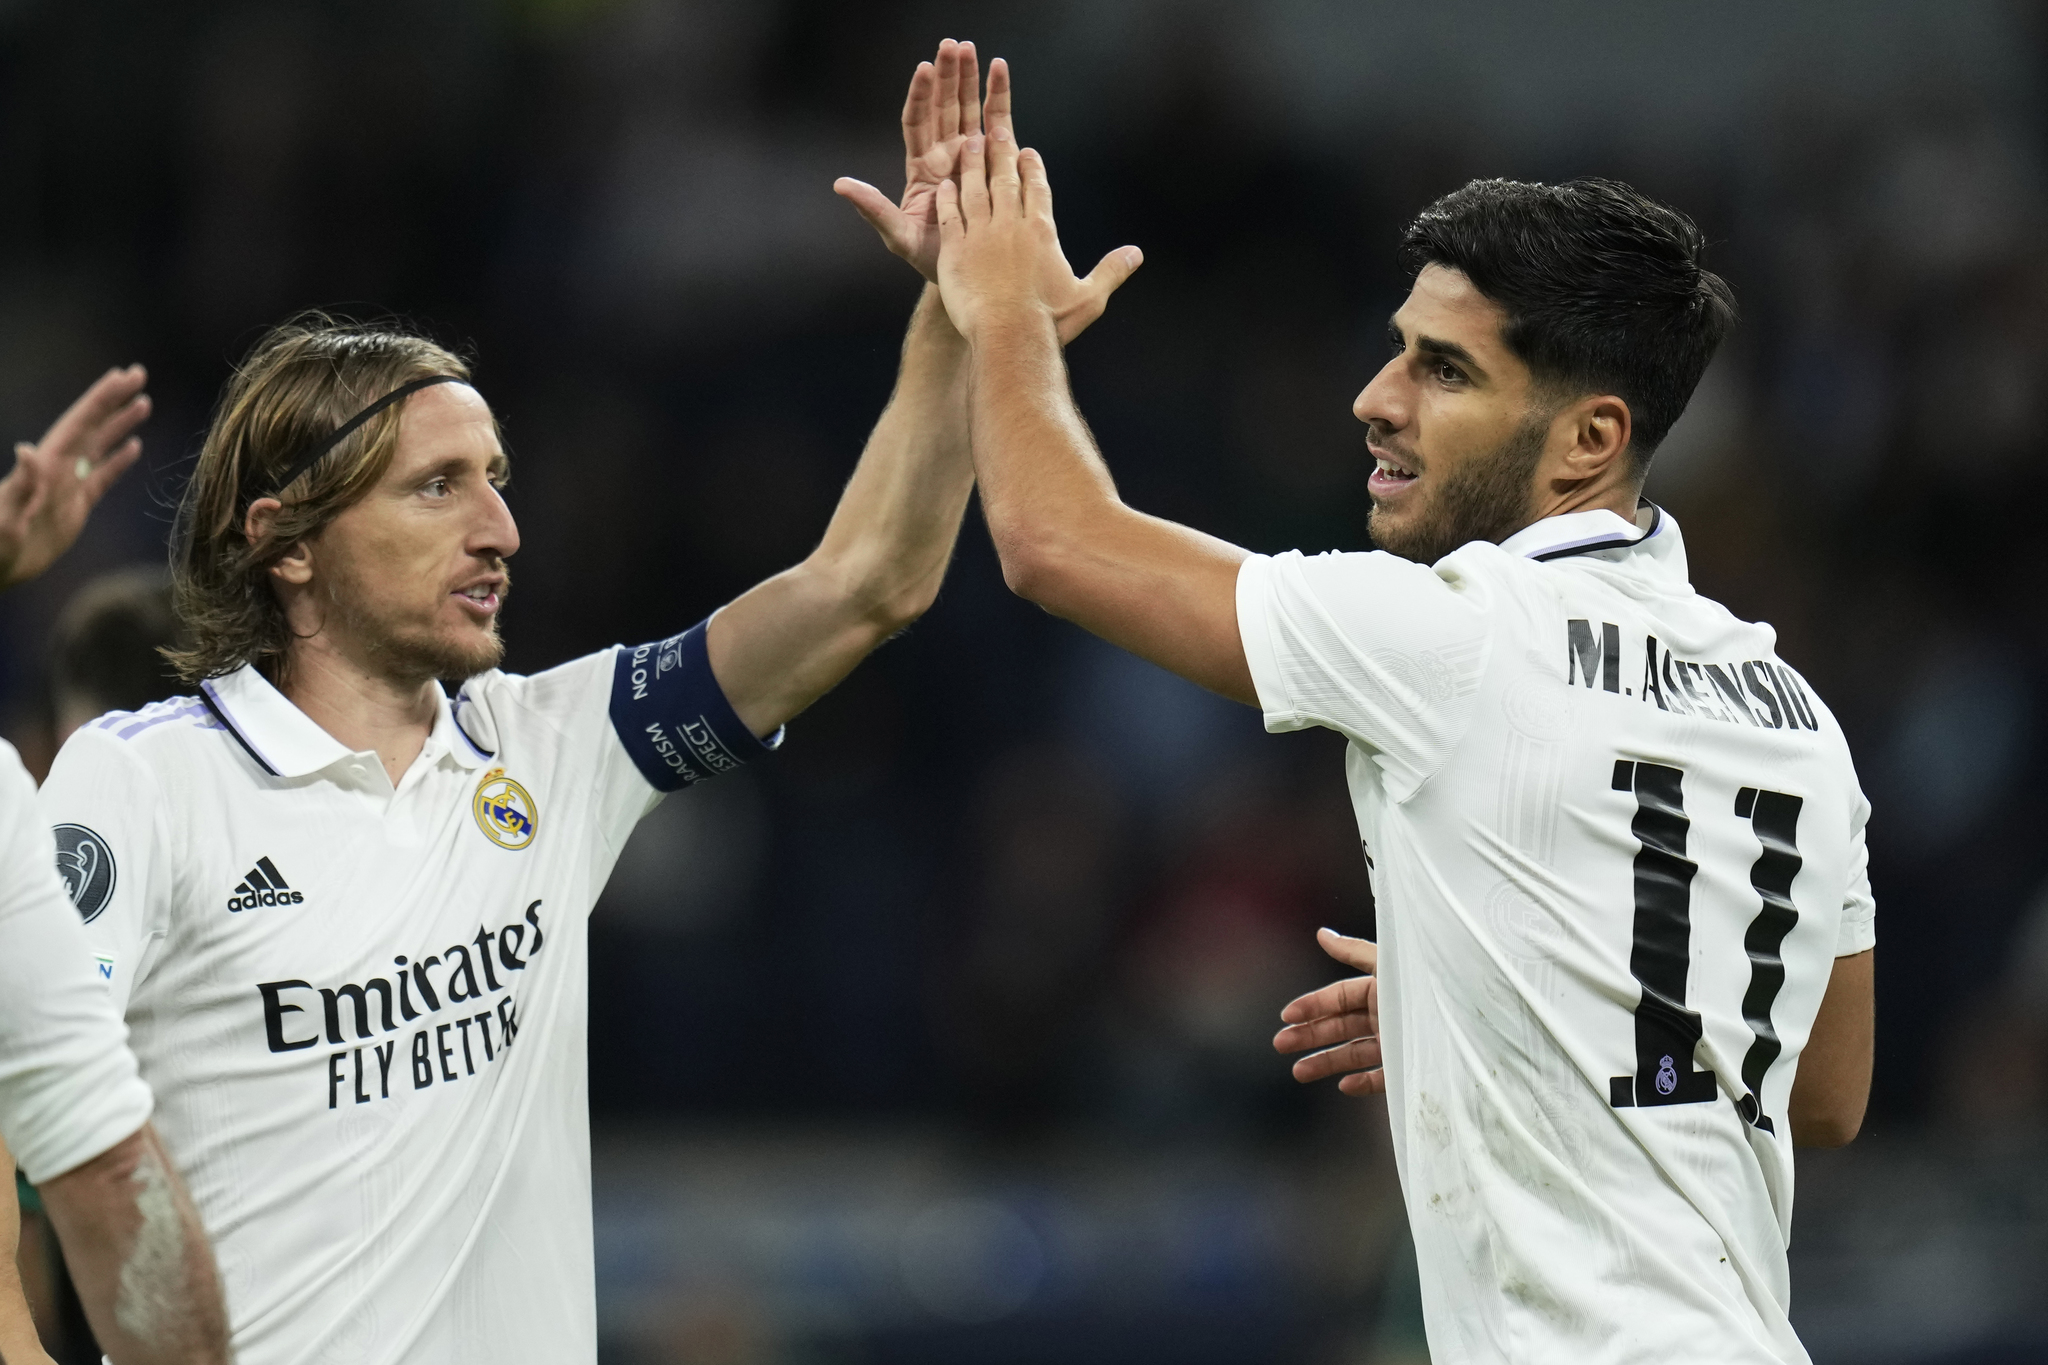 Real Madrid's Marco Asensio, right, celebrates with teammate Luka Modric after scoring